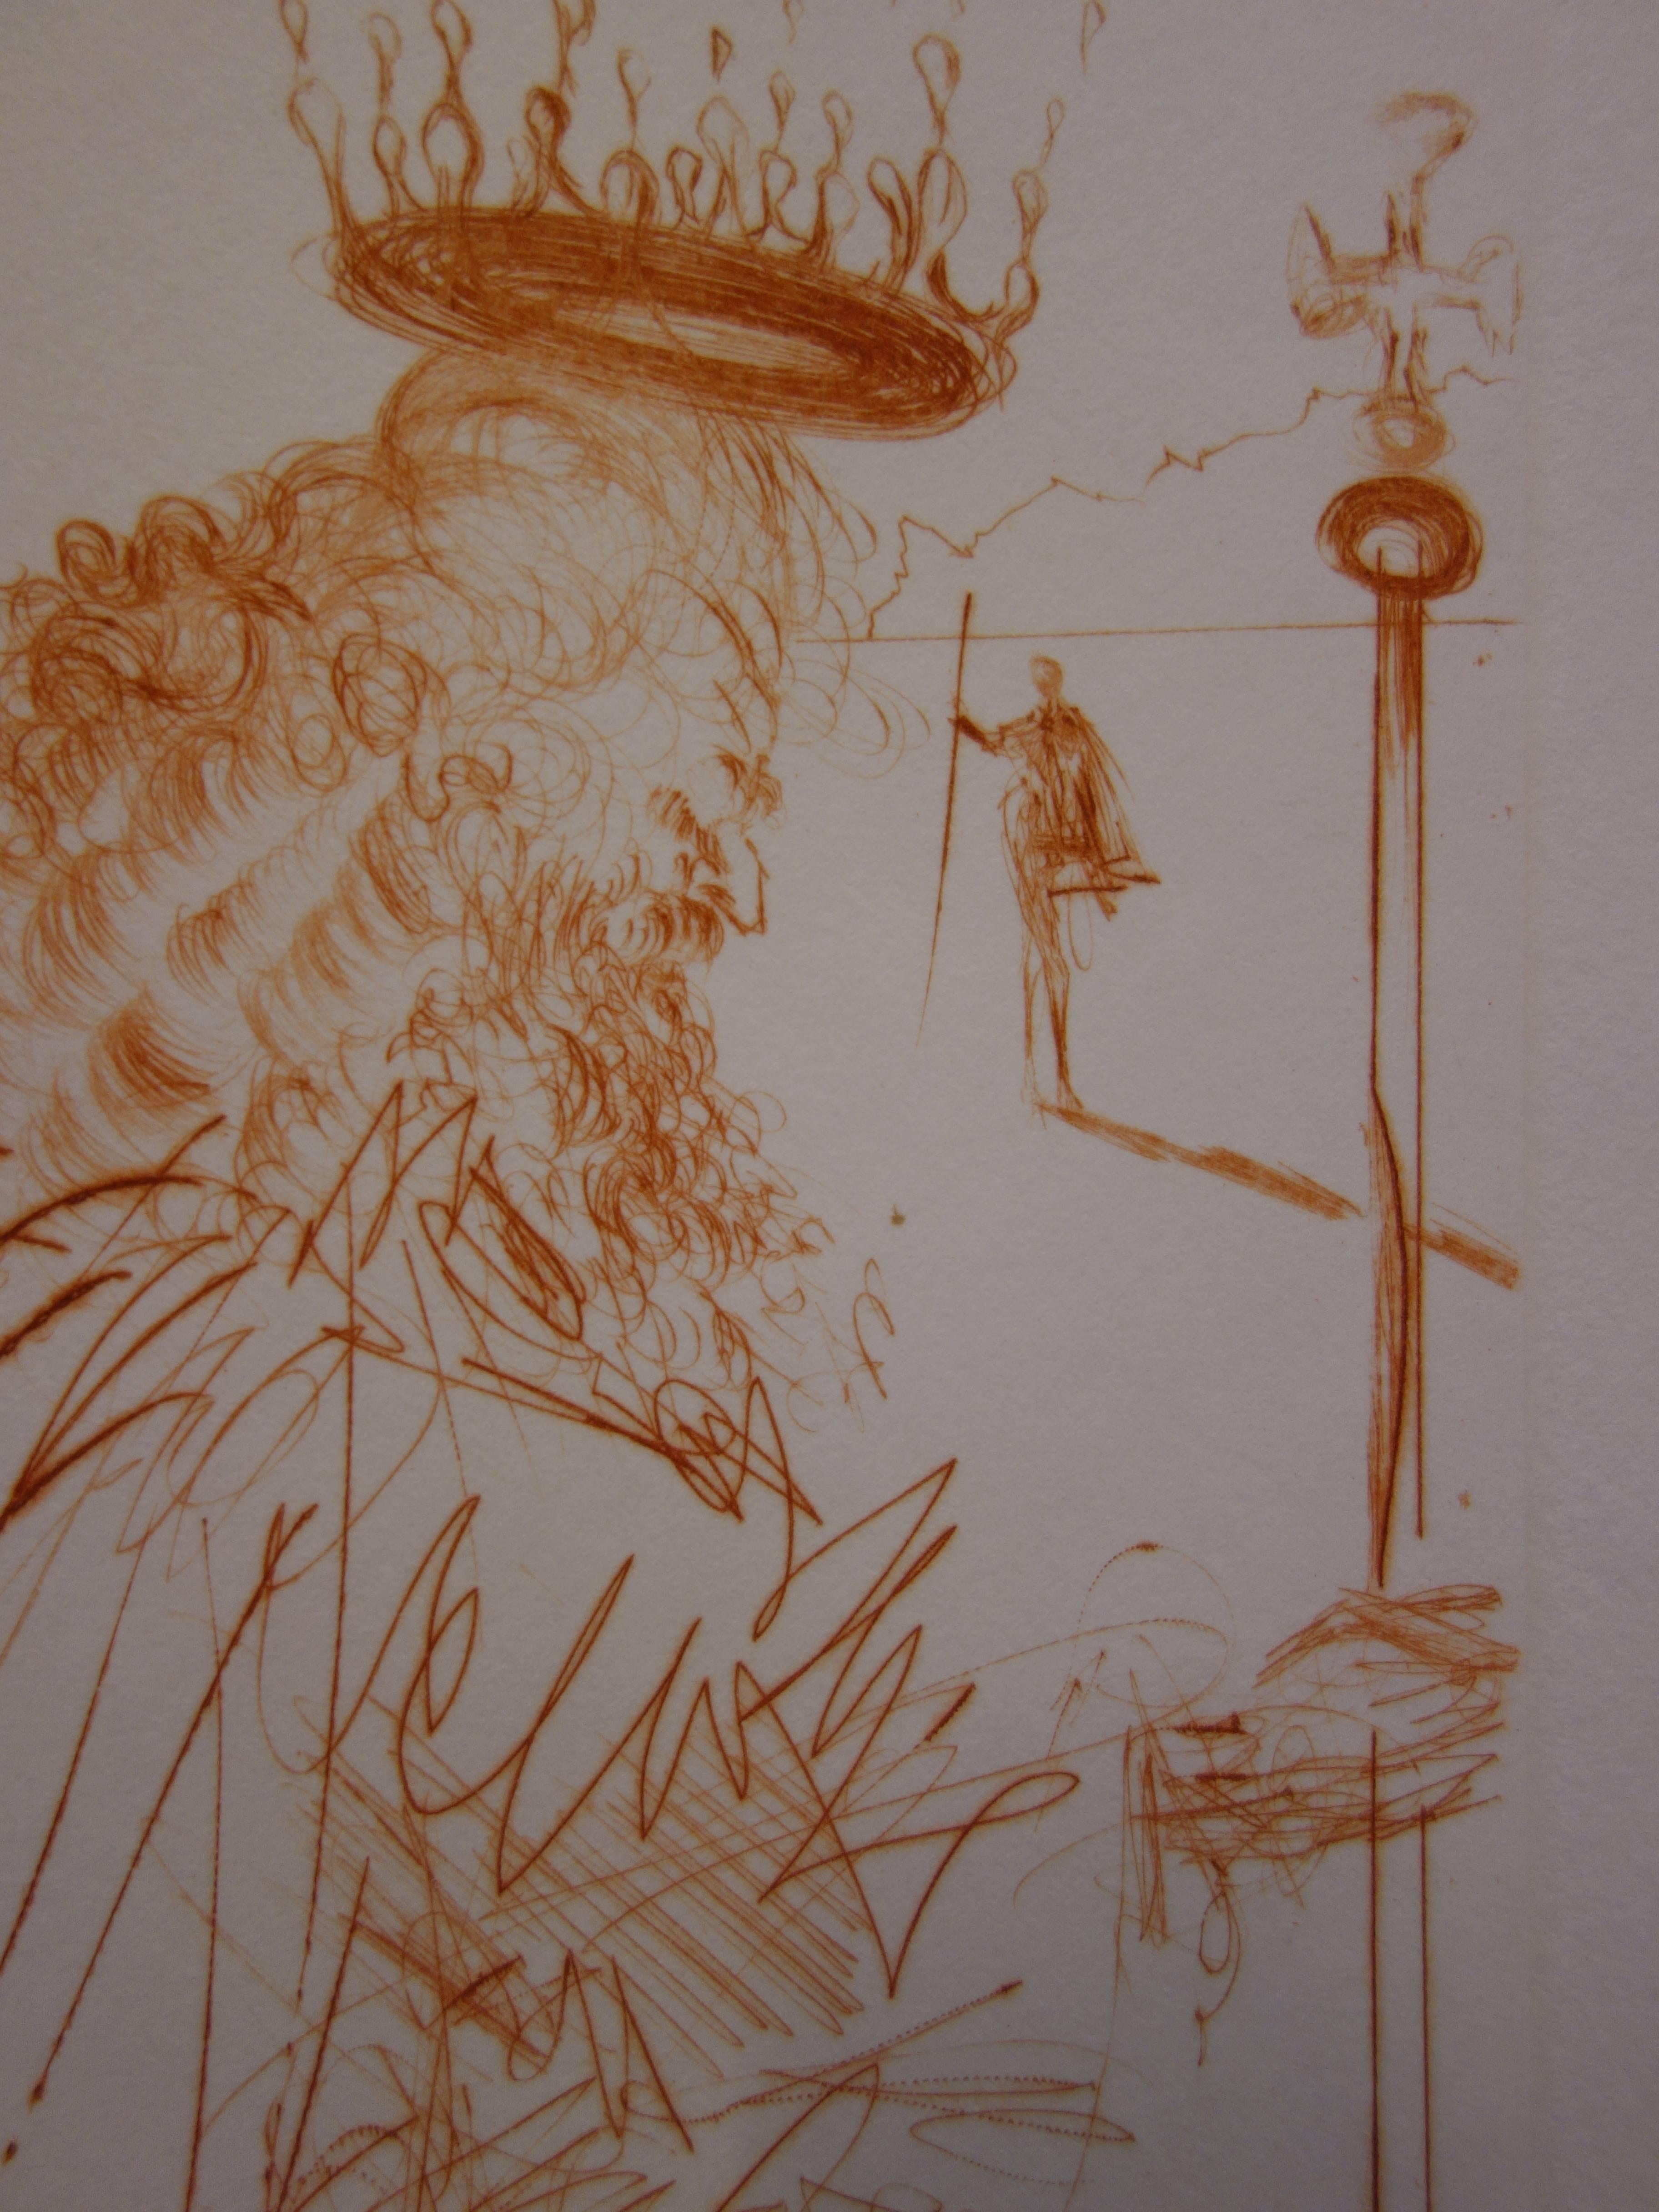 Salvador DALI
Much Ado About Shakespeare : King Lear, 1968

Original etching in sanguine
Handsigned
Justified EA /18
On Rives vellum 38 x 28 cm (c. 15 x 11 inch)

REFERENCES : 
- Catalog raisonne Field #68-7 O
- Catalog raisonne Michler and